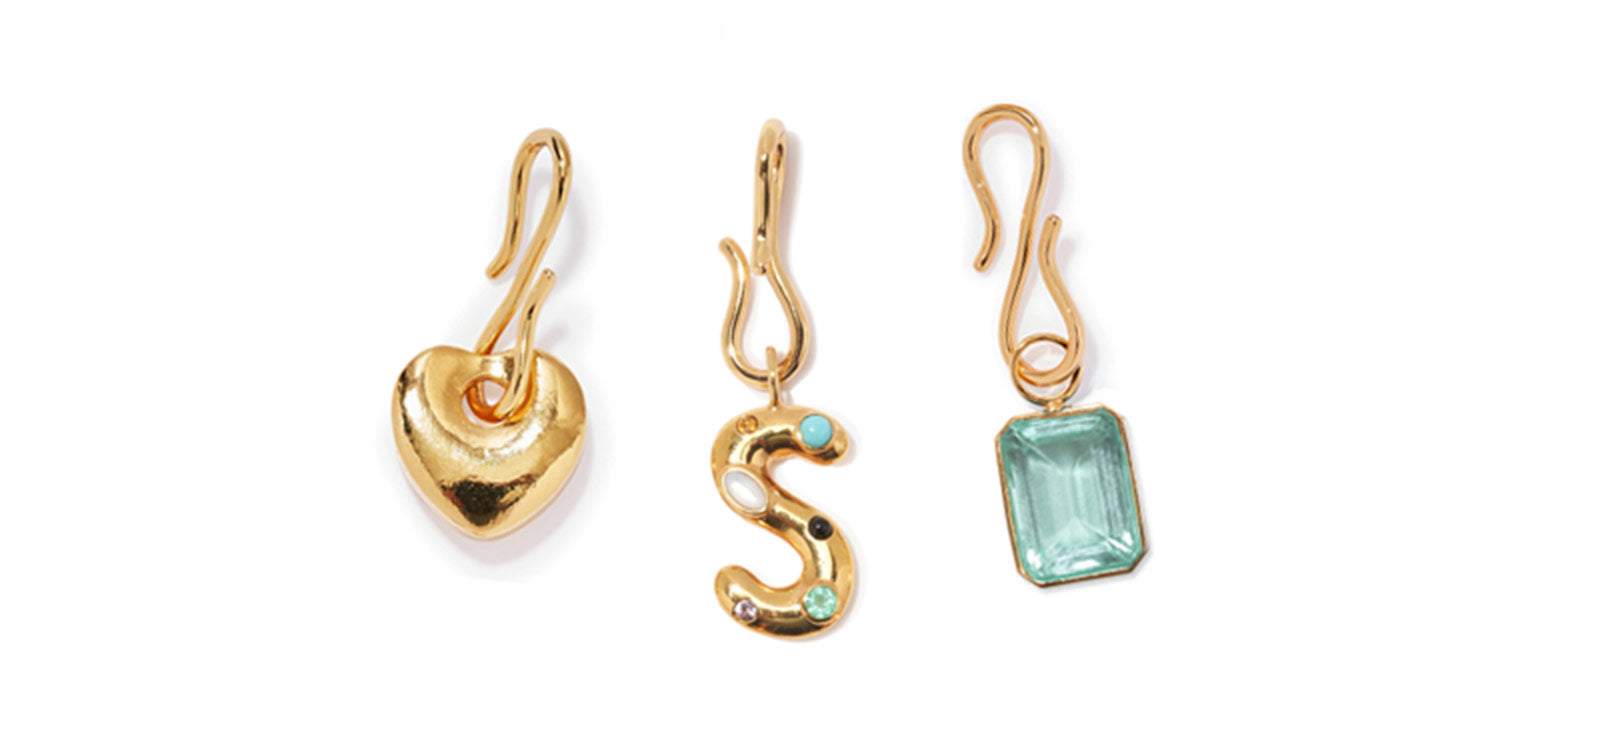 Get charmed! Shop your favorites from our signature pendants & charms.